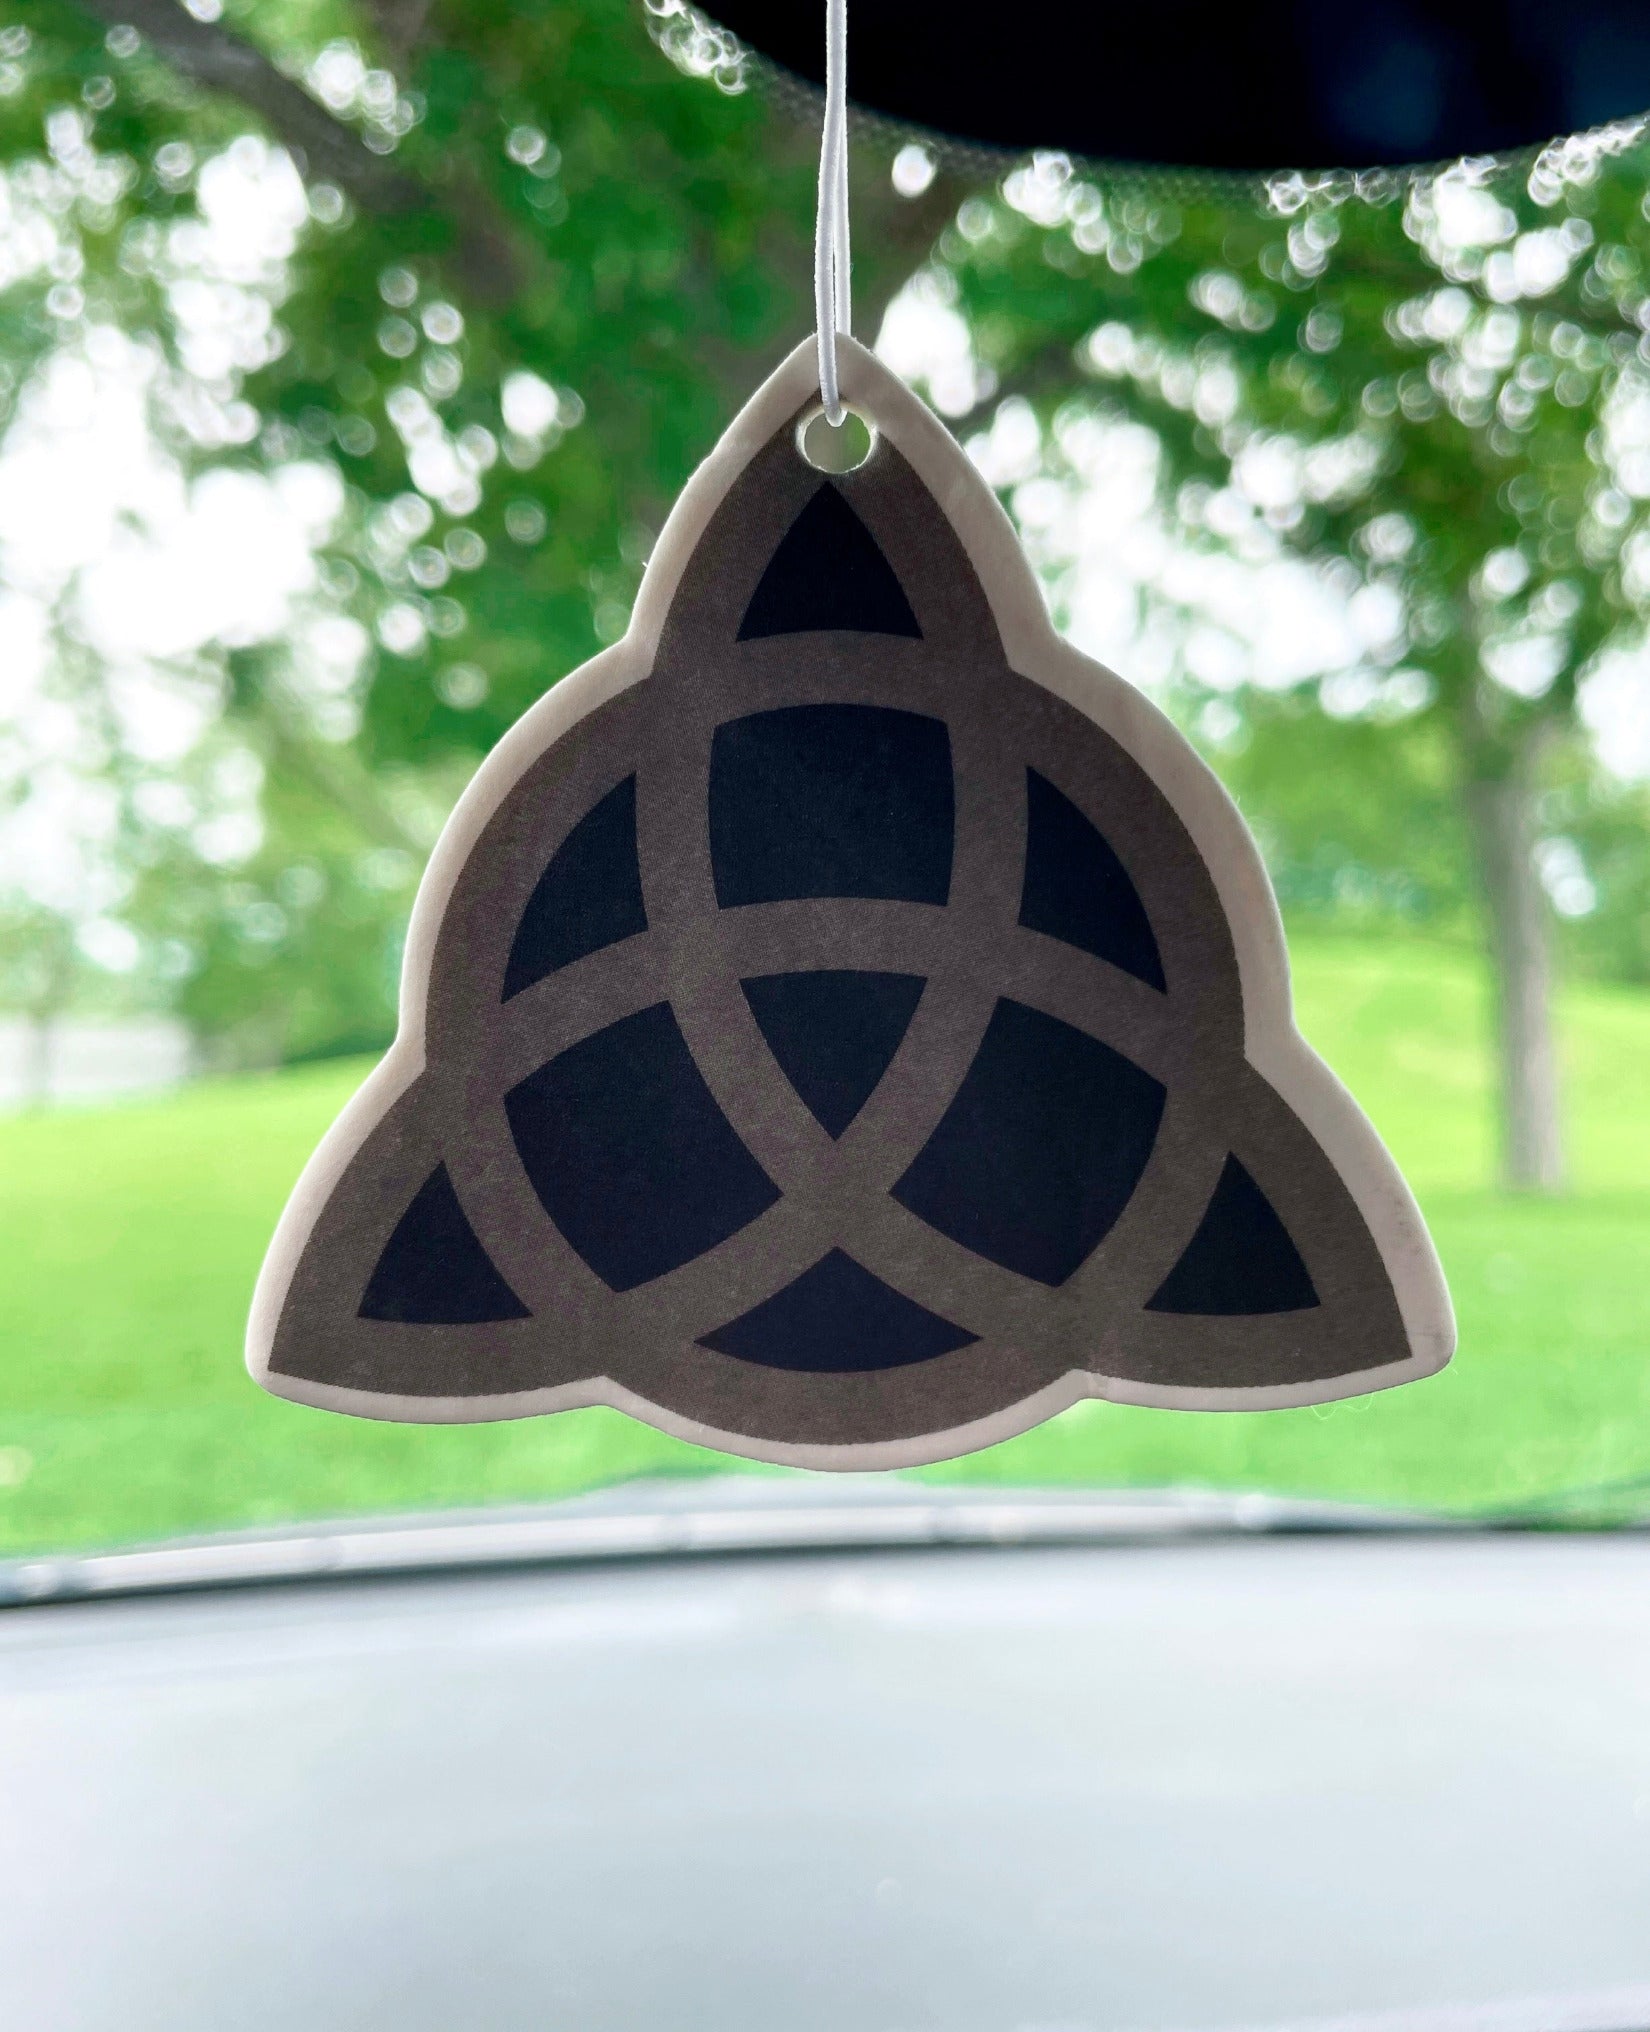 Pictured is an air freshener in the shape of a triquetra